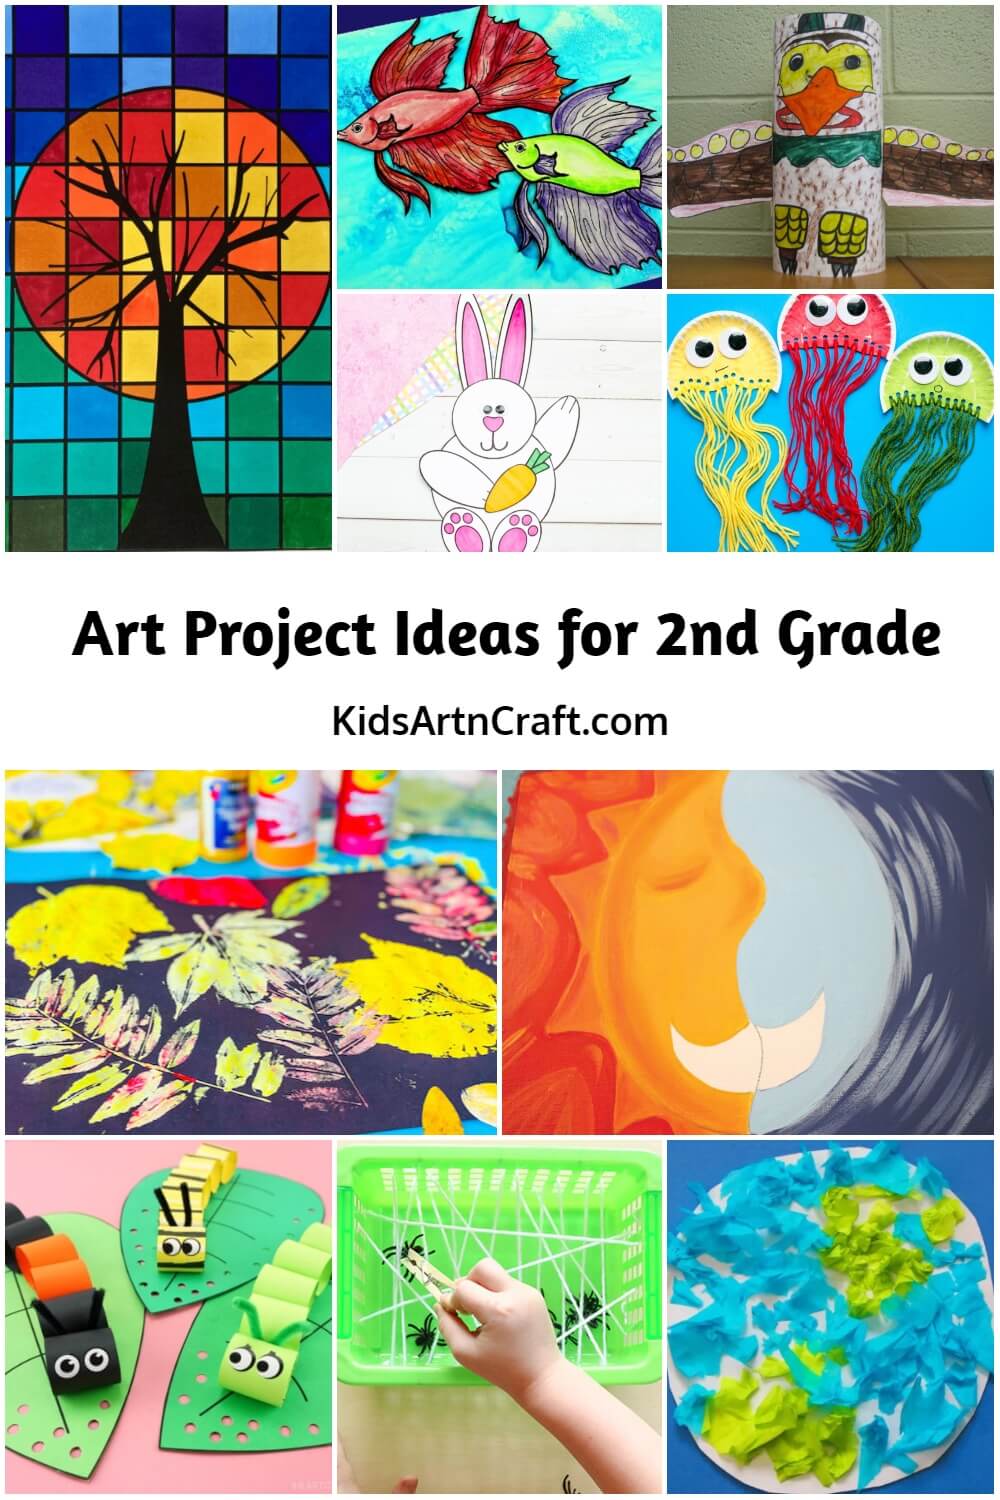 Art Project Ideas for 2nd Grade